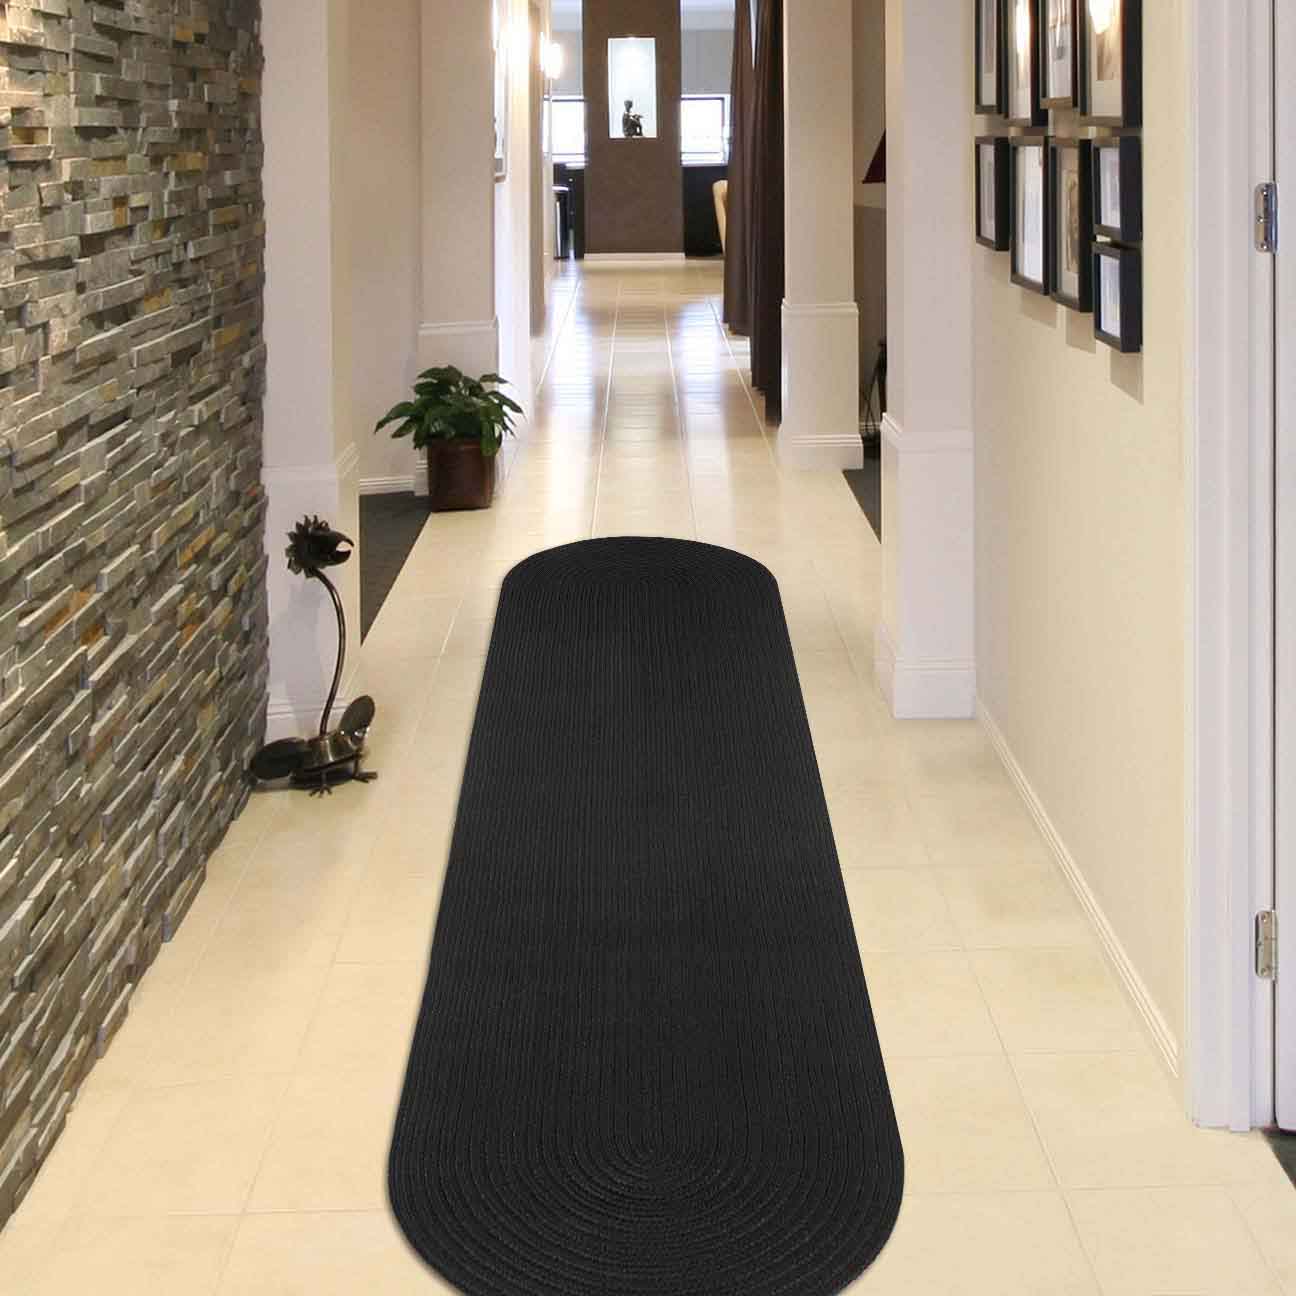 Classic Braided Weave Oval Area Rug Indoor Outdoor Rugs - Black